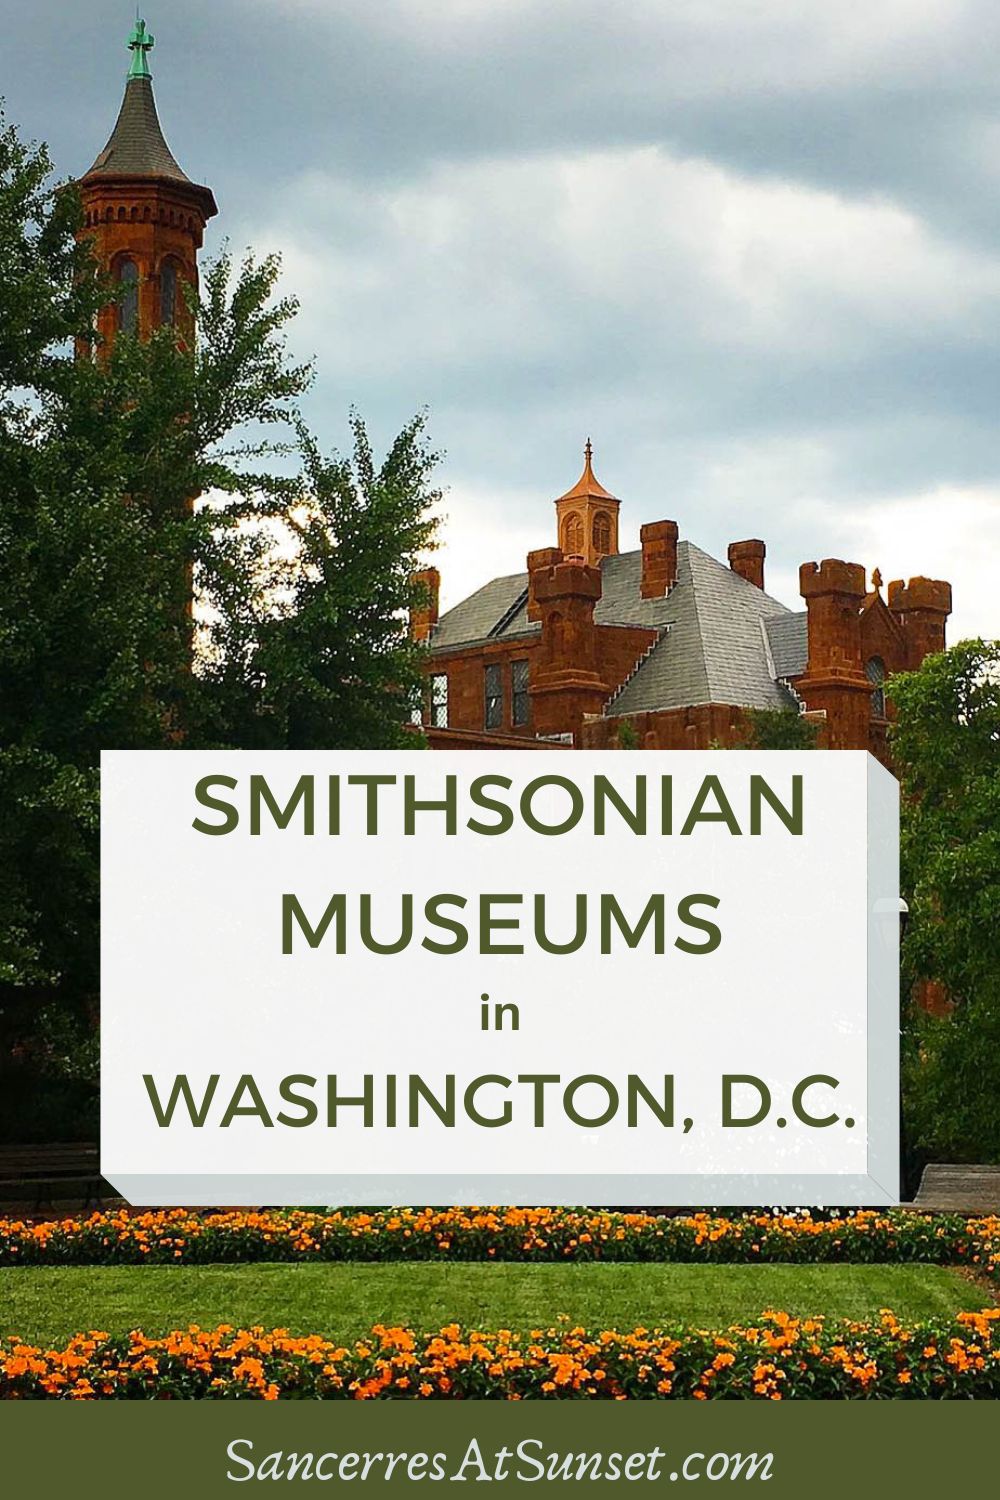 Smithsonian Museums in Washington, D.C.